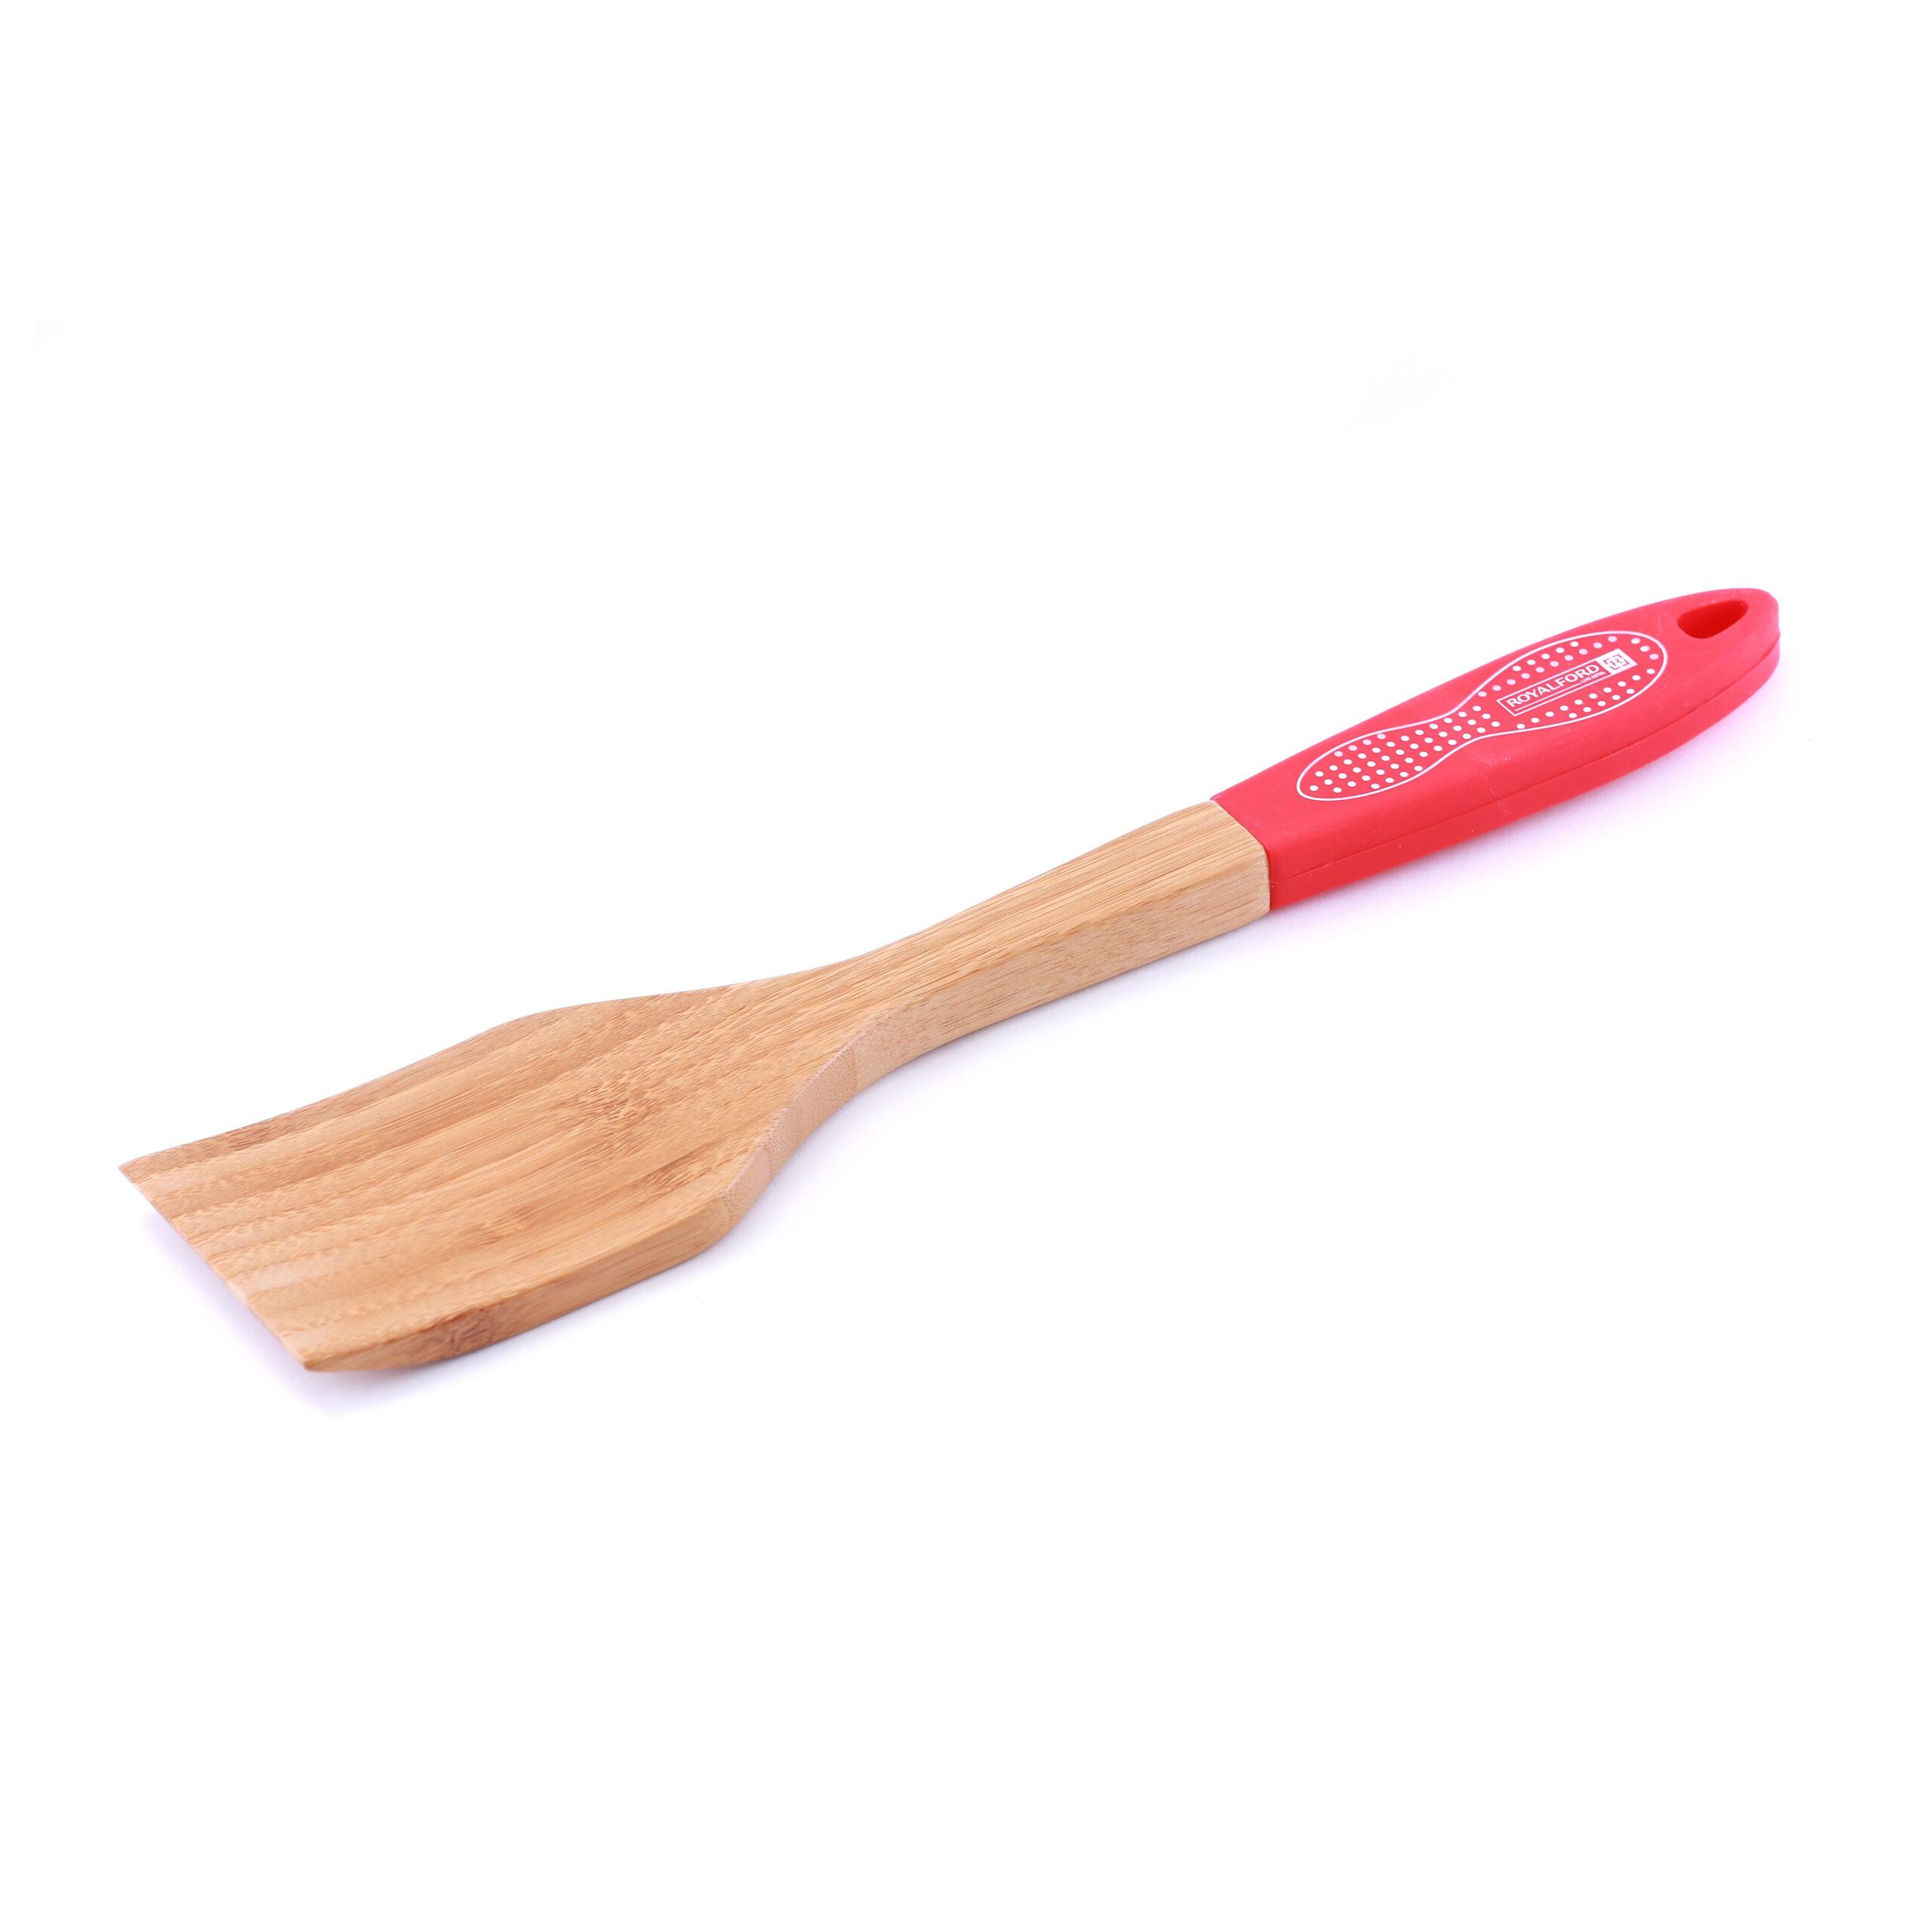 Royalford Wooden Spatula - Ultra Stylish Heat Resistant Turner/Fish Slice with Long Handle - Ideal Flipper Spatula for Flipping Lifting Serving Eggs Omelette Pancakes Fish Burgers